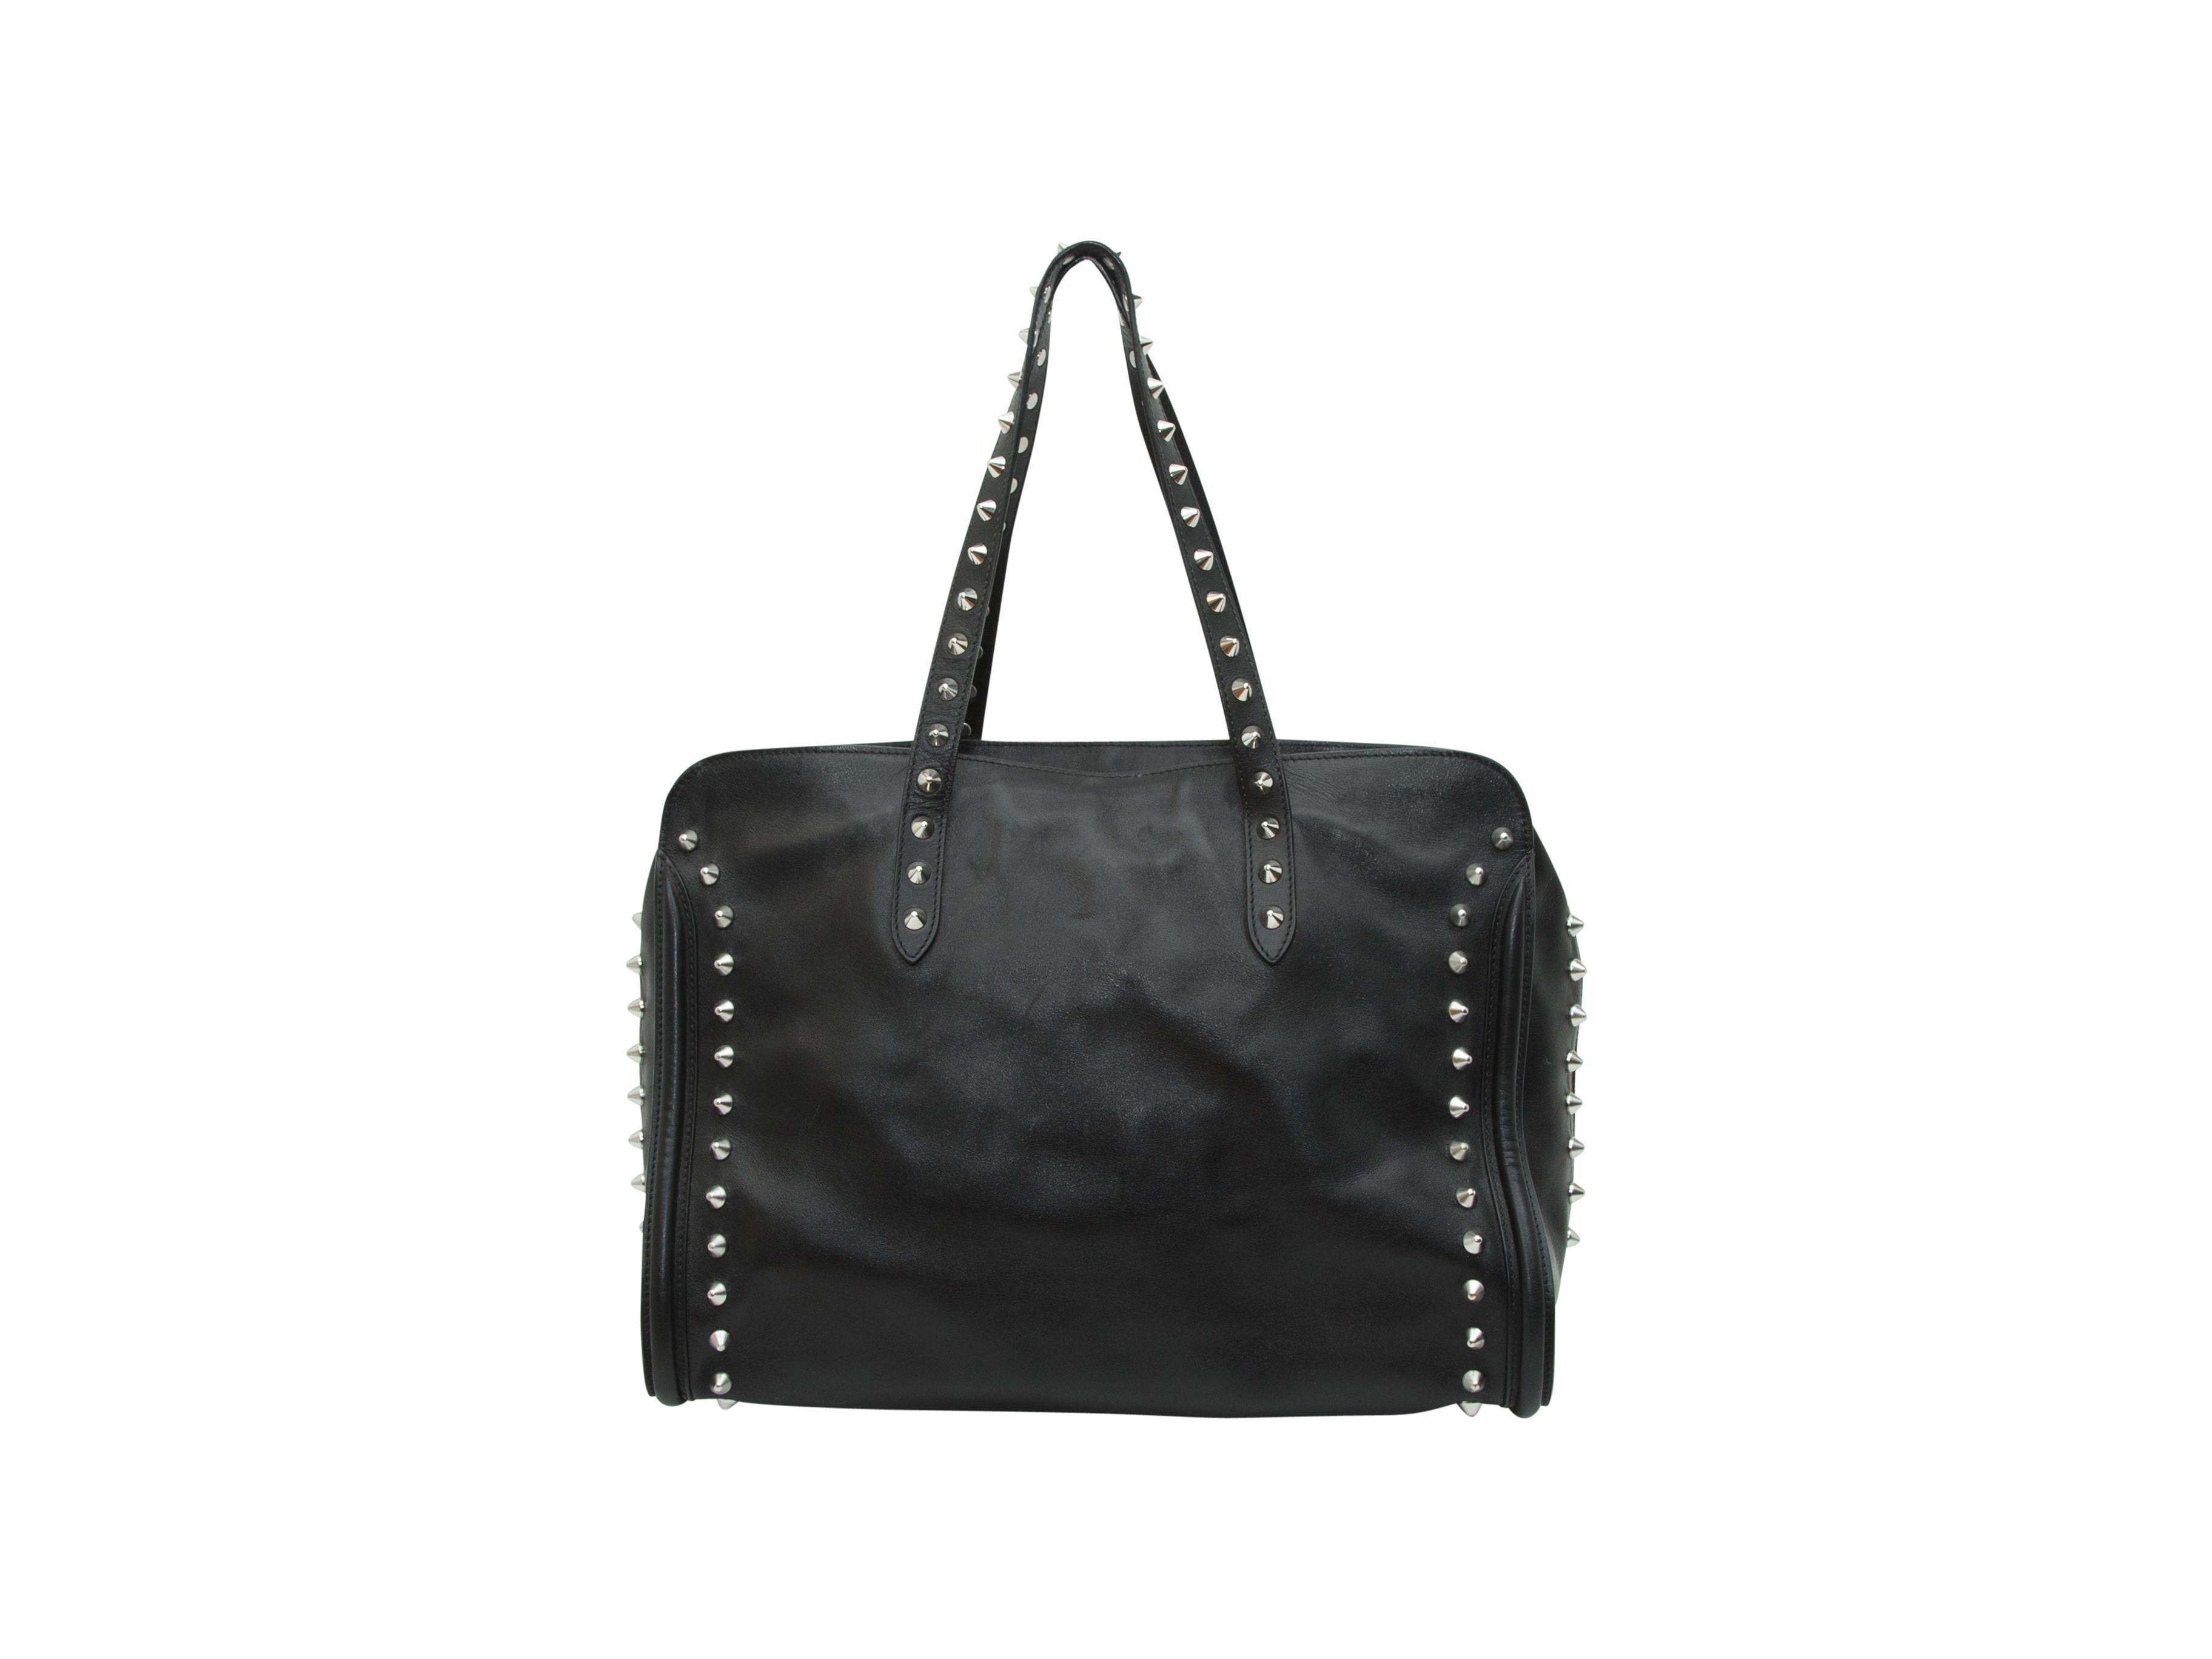 Alexander McQueen Black Studded Leather Tote Bag 2